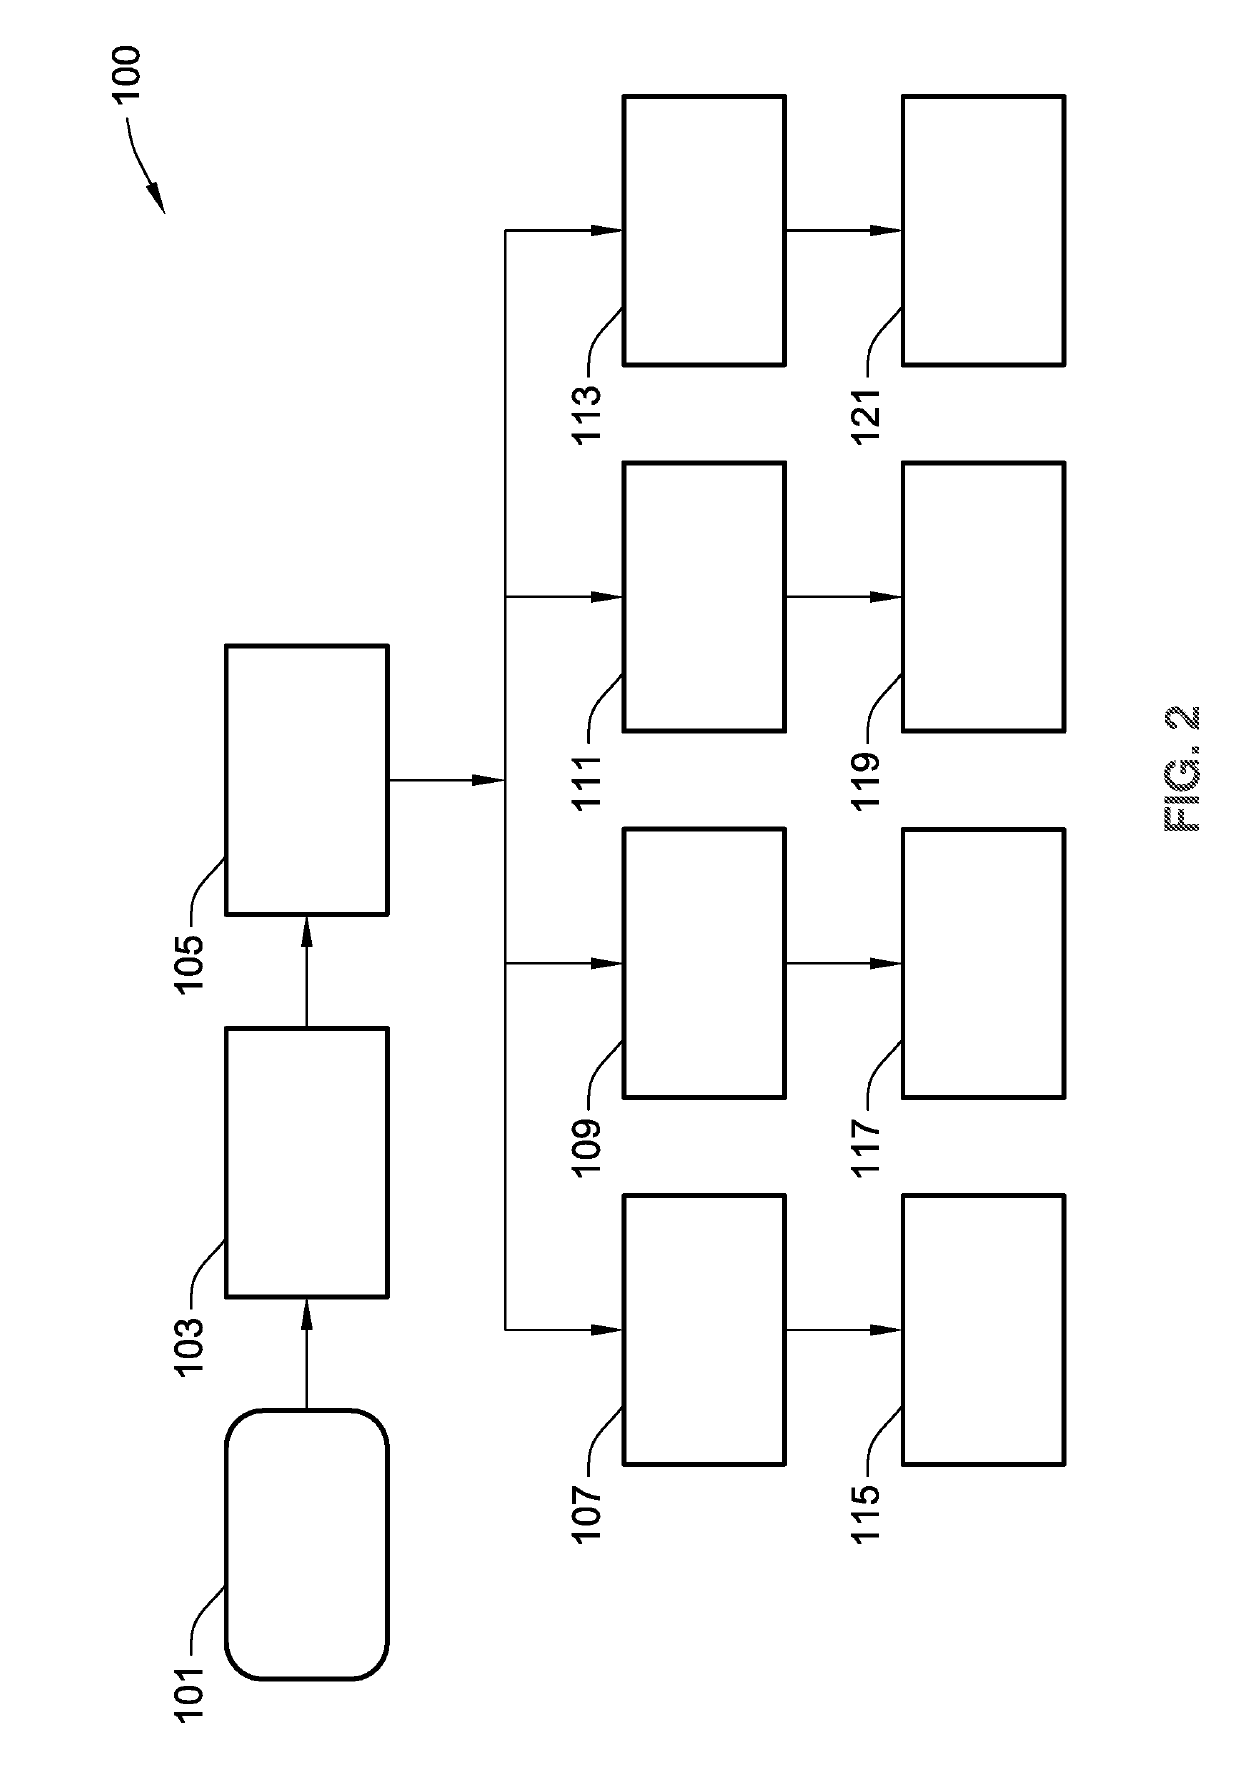 Downforce feedback systems and control logic for active aerodynamic devices of motor vehicles